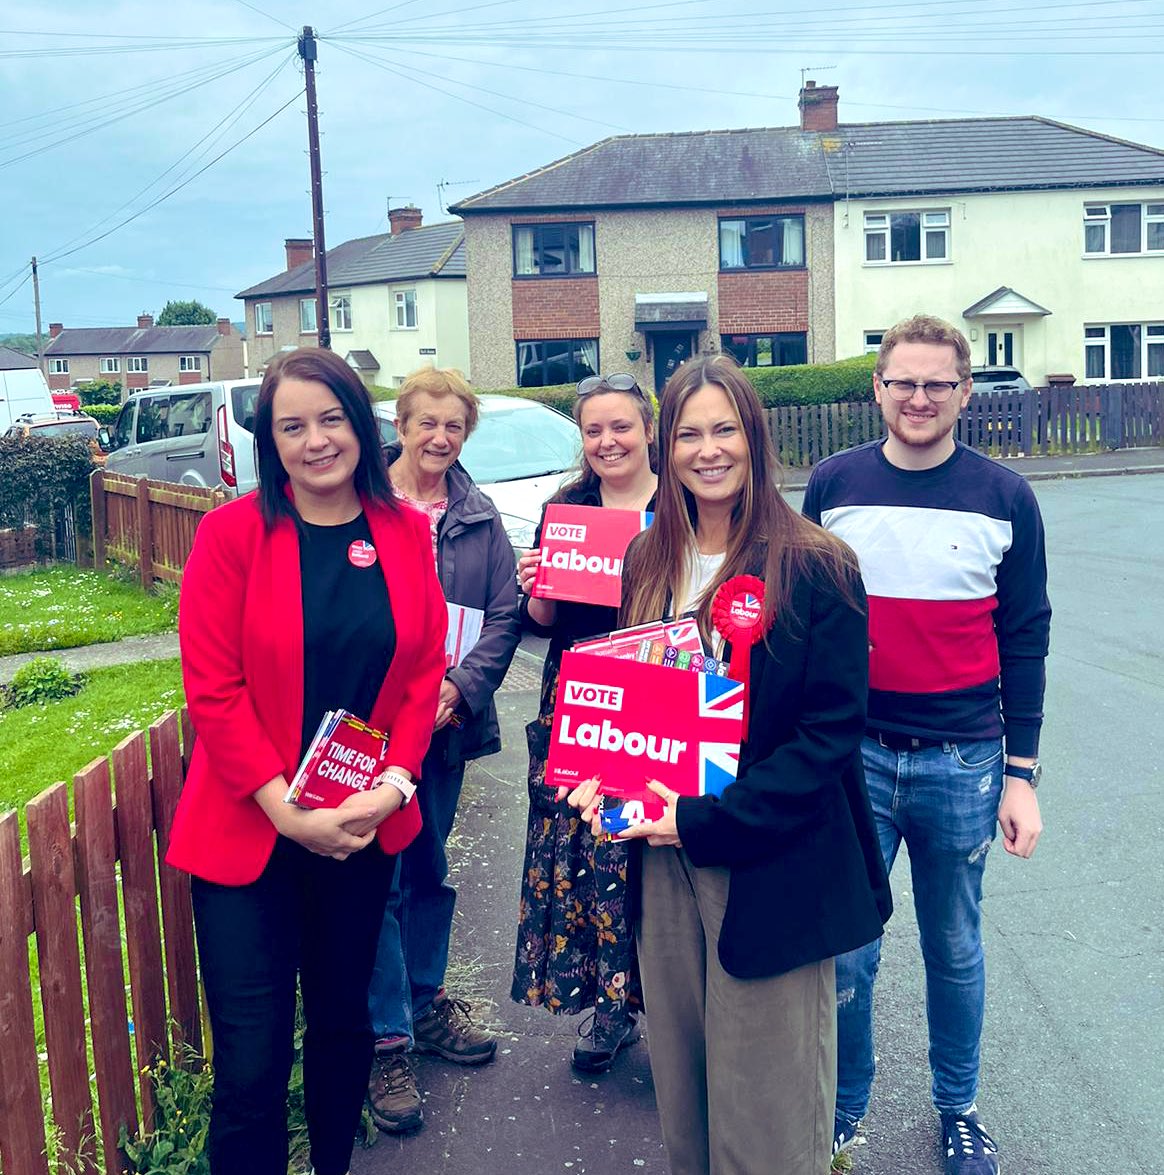 Brilliant to join @JadeBotterill campaigning in Ossett and Denby Dale this afternoon 🌹